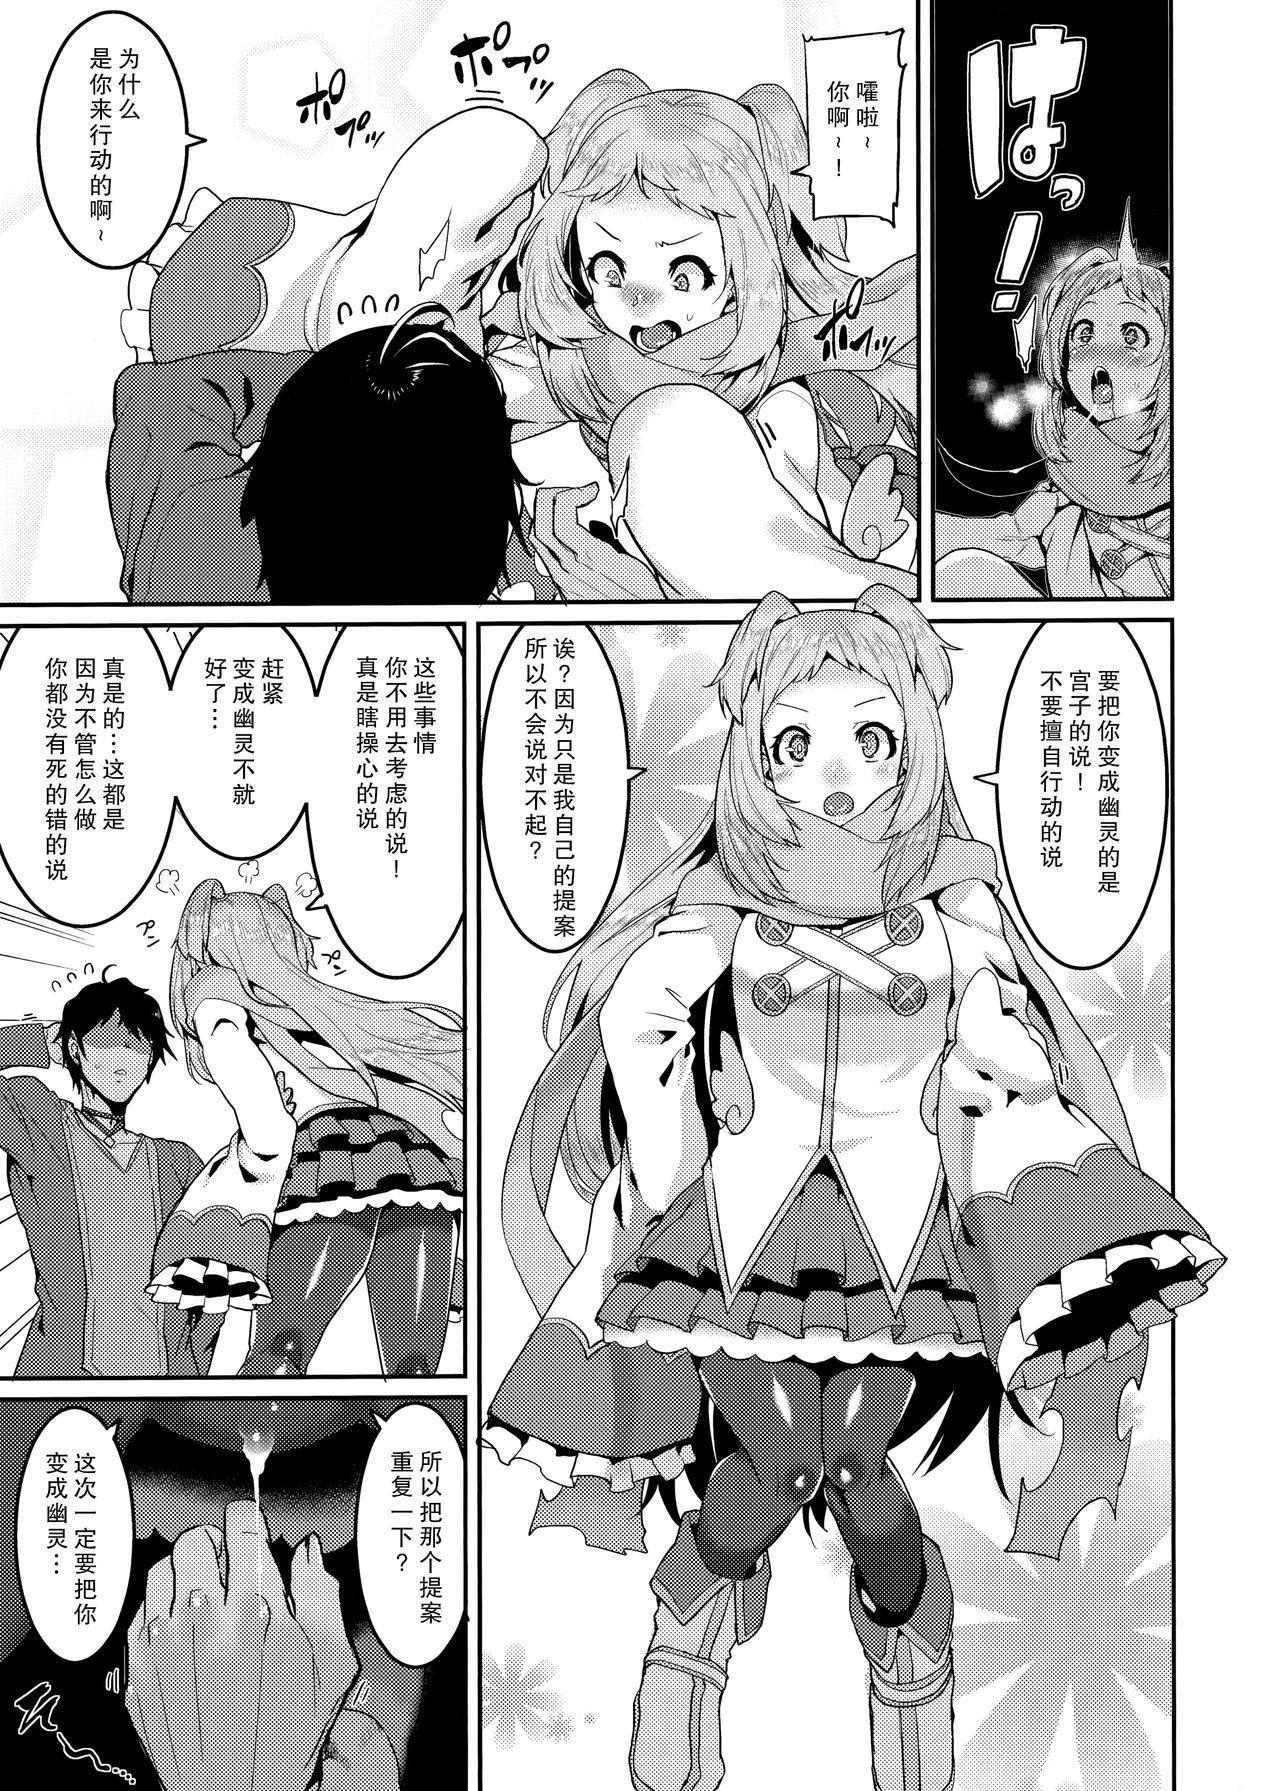 Morocha (C96) [HBO (Henkuma)] Pudding Switch (Princess Connect! Re:Dive) [Chinese] 【零食汉化组】 - Princess connect Anal Play - Page 8